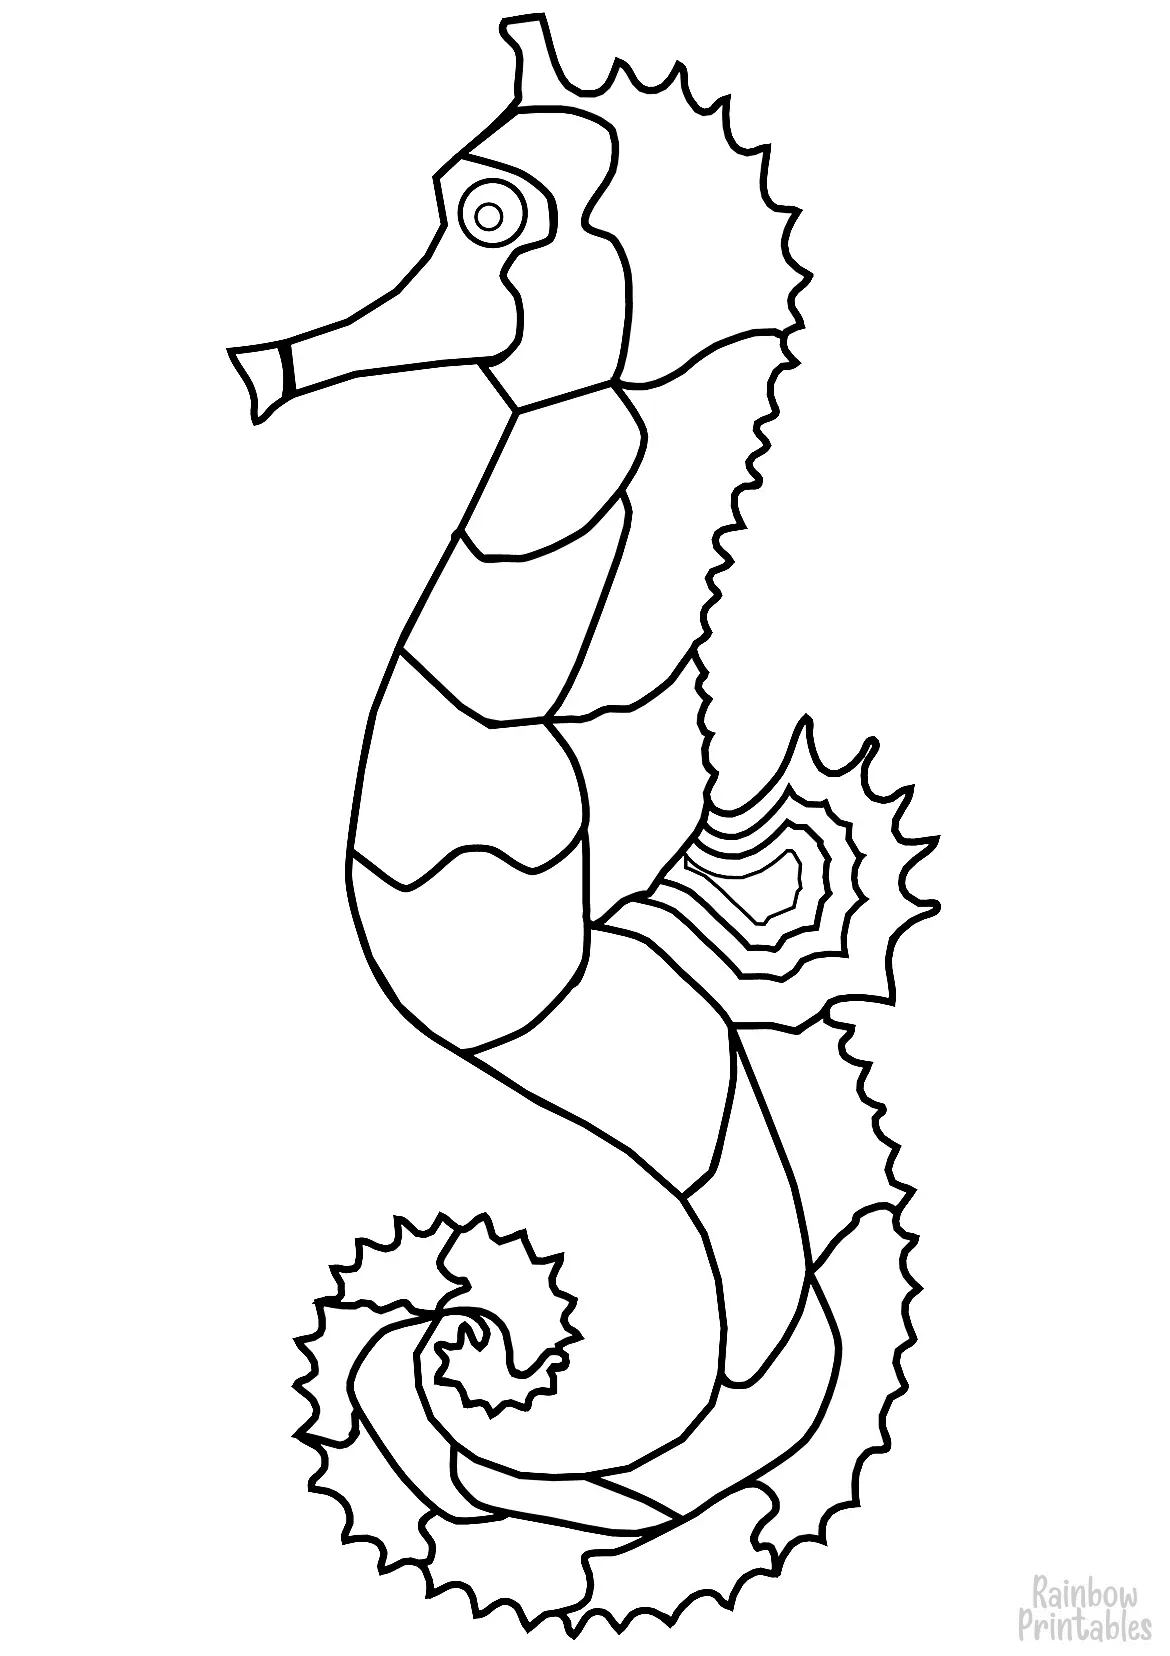 SIMPLE-EASY-line-drawings-SEAHORSE-coloring-page-for-kids